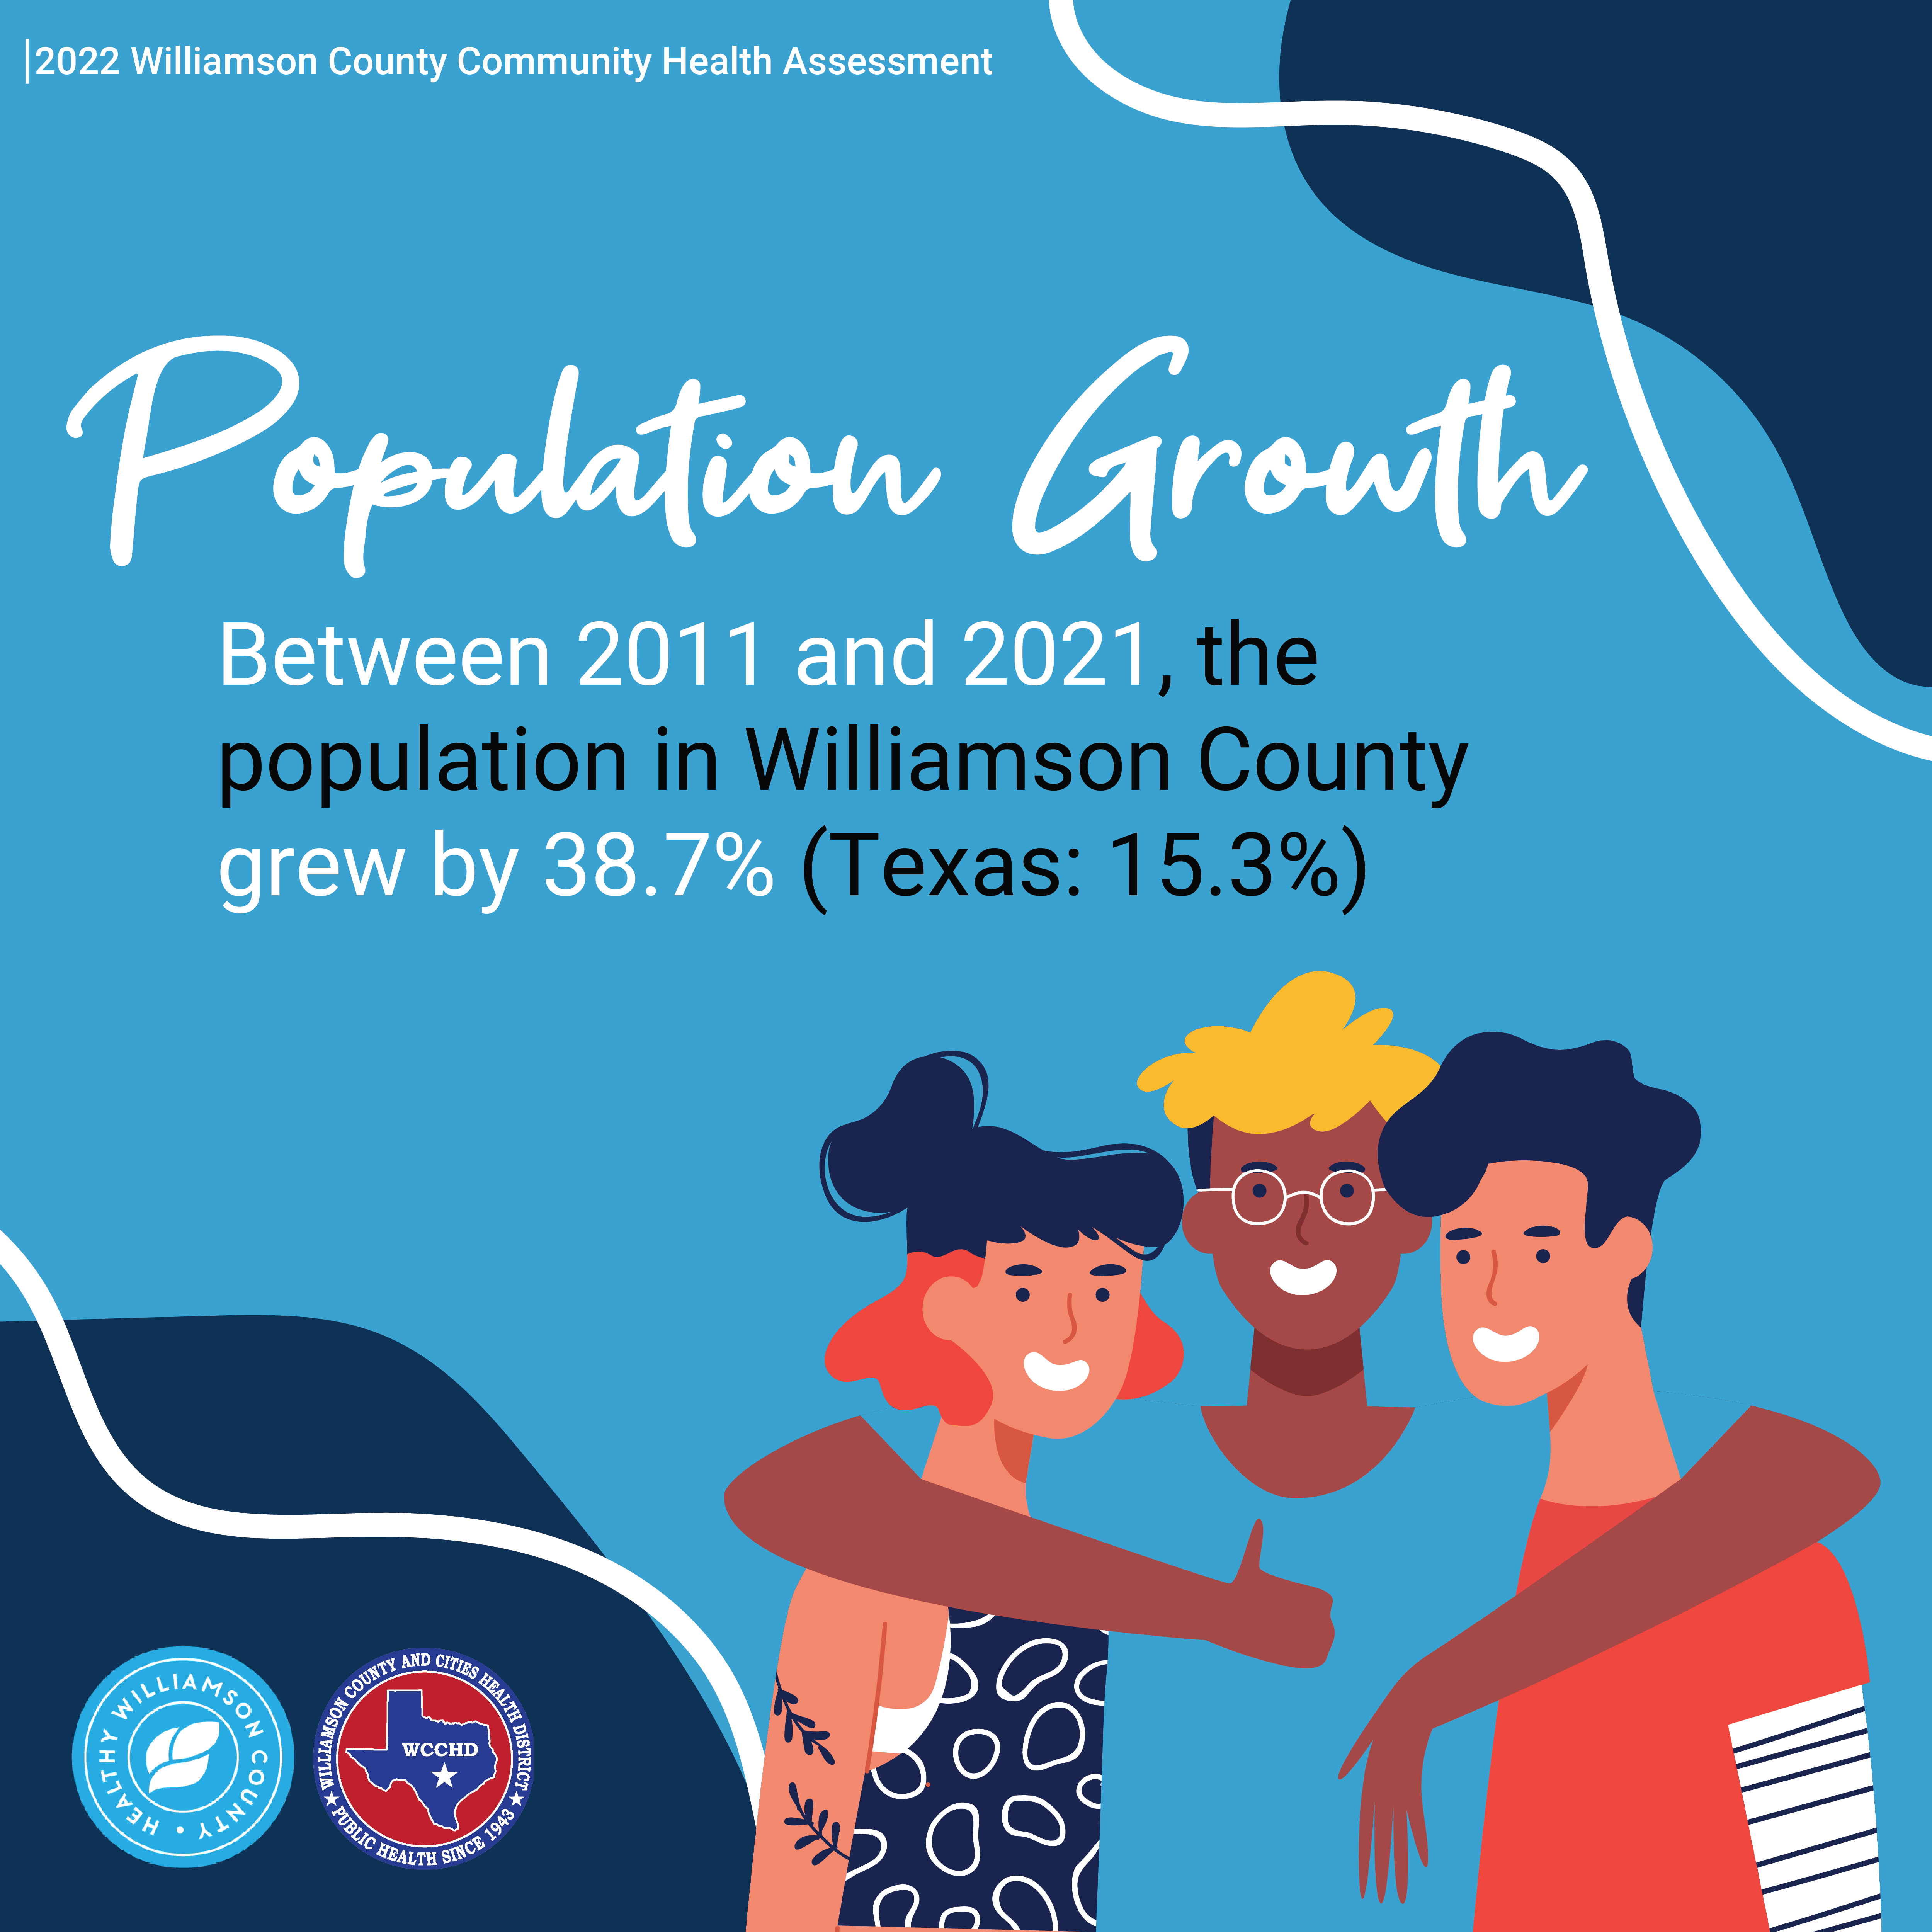 2022 Williamson County Community Health Assessment. Population Growth. Between 2011 and 2021, the population in Williamson County grew by 38.7% (Texas: 15.3%). Below, an illustrated person with their arms on the shoulders of two other illustrated people and giving a thumbs-up sign; all three smiling. Blobs and squiggly lines in bottom left and top right corners. Logos of Healthy Williamson County and Williamson County and Cities Health District.